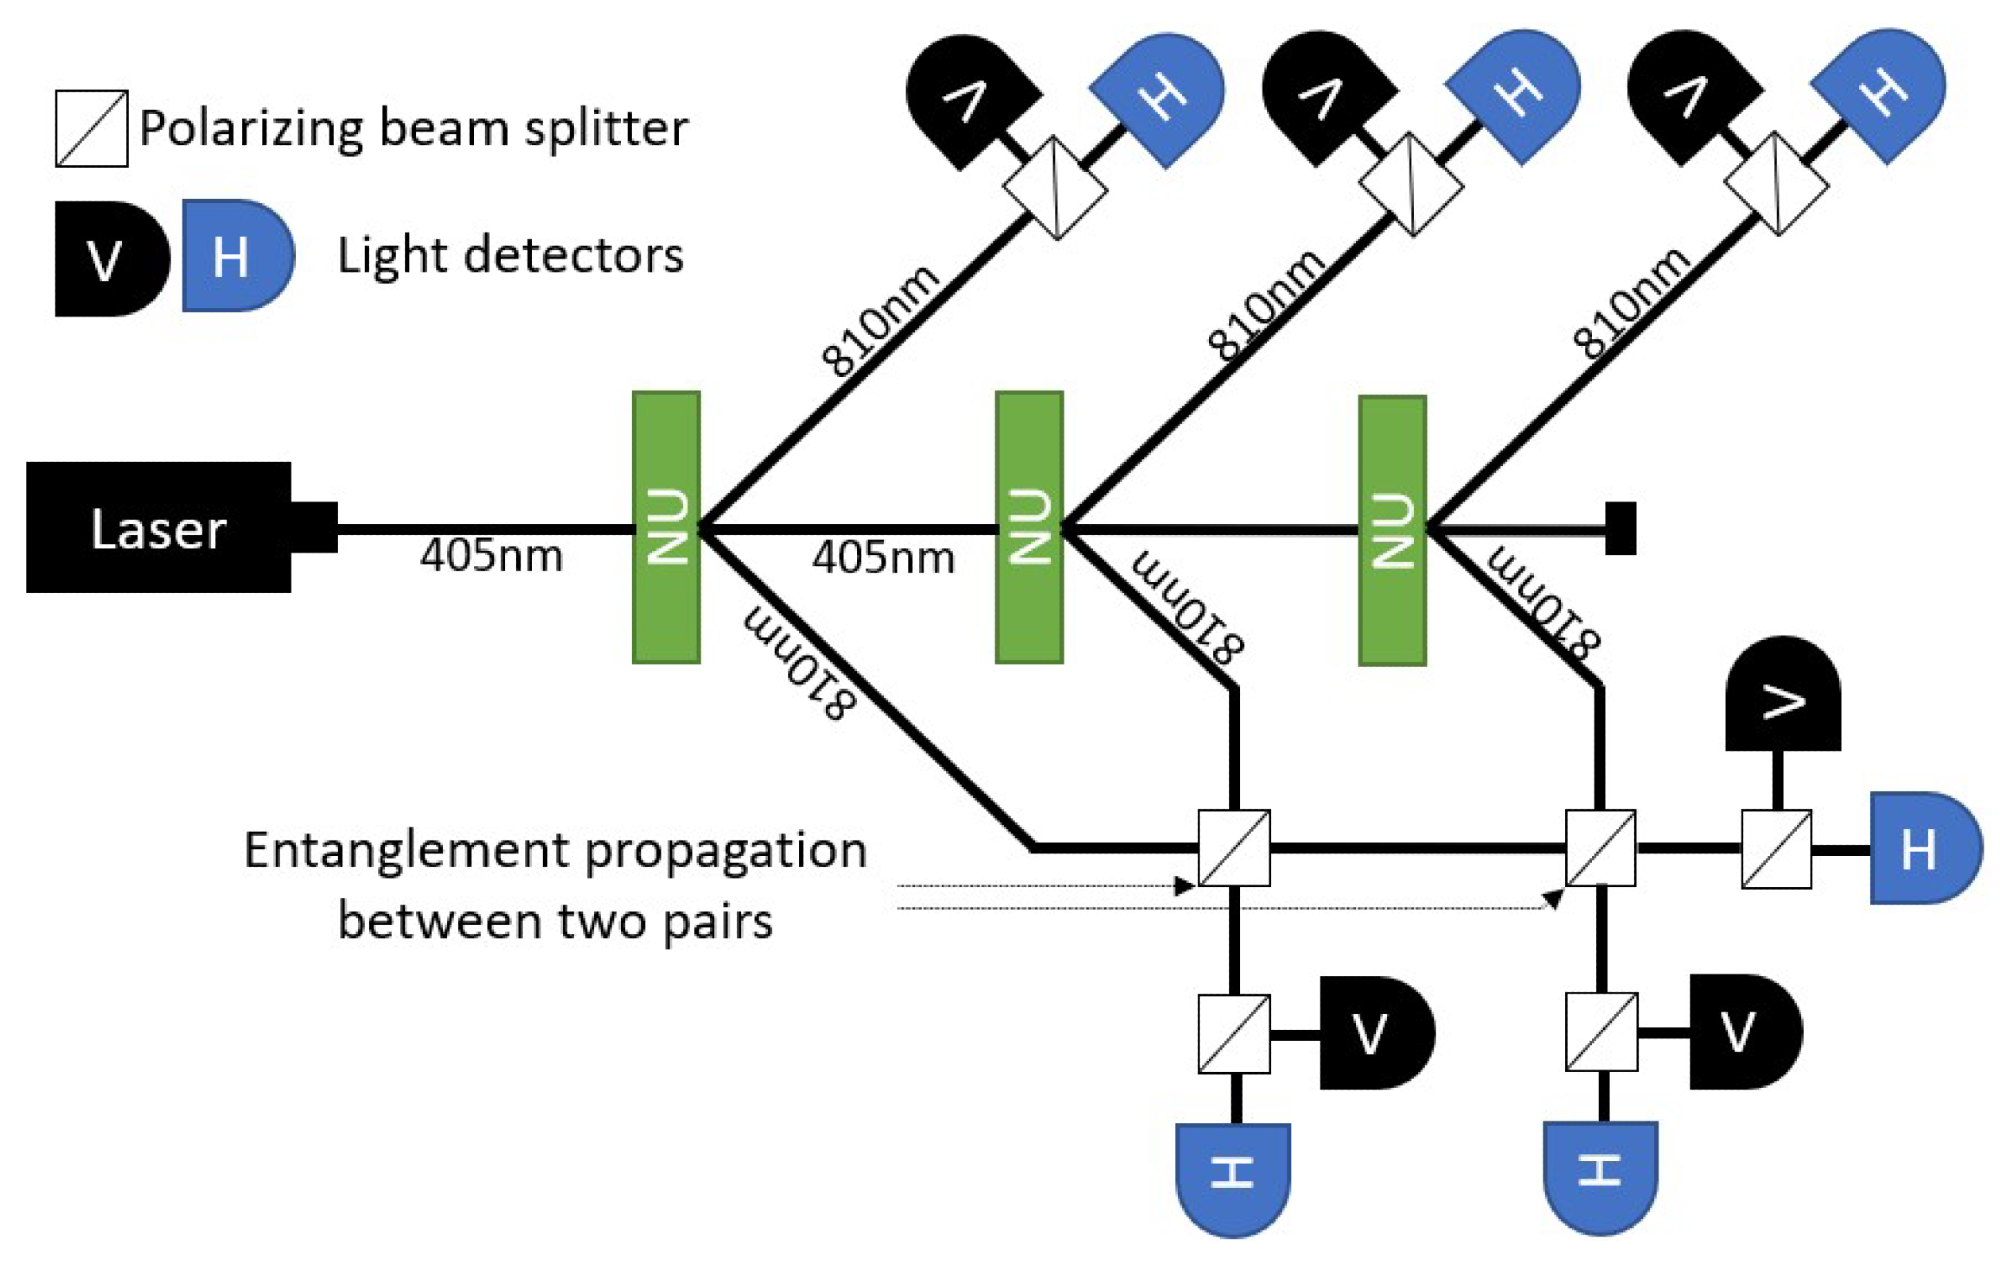 Experimental setup for six-photon entanglement. Firstly, two pairs of photons are generated by nonlinear units (NUs) in series. Following this, one photon from each pair reconnects with the remaining section of the system via the polarization beam splitter. From the reconnection points, entanglement propagates throughout the entire system, generating the GHZ state.